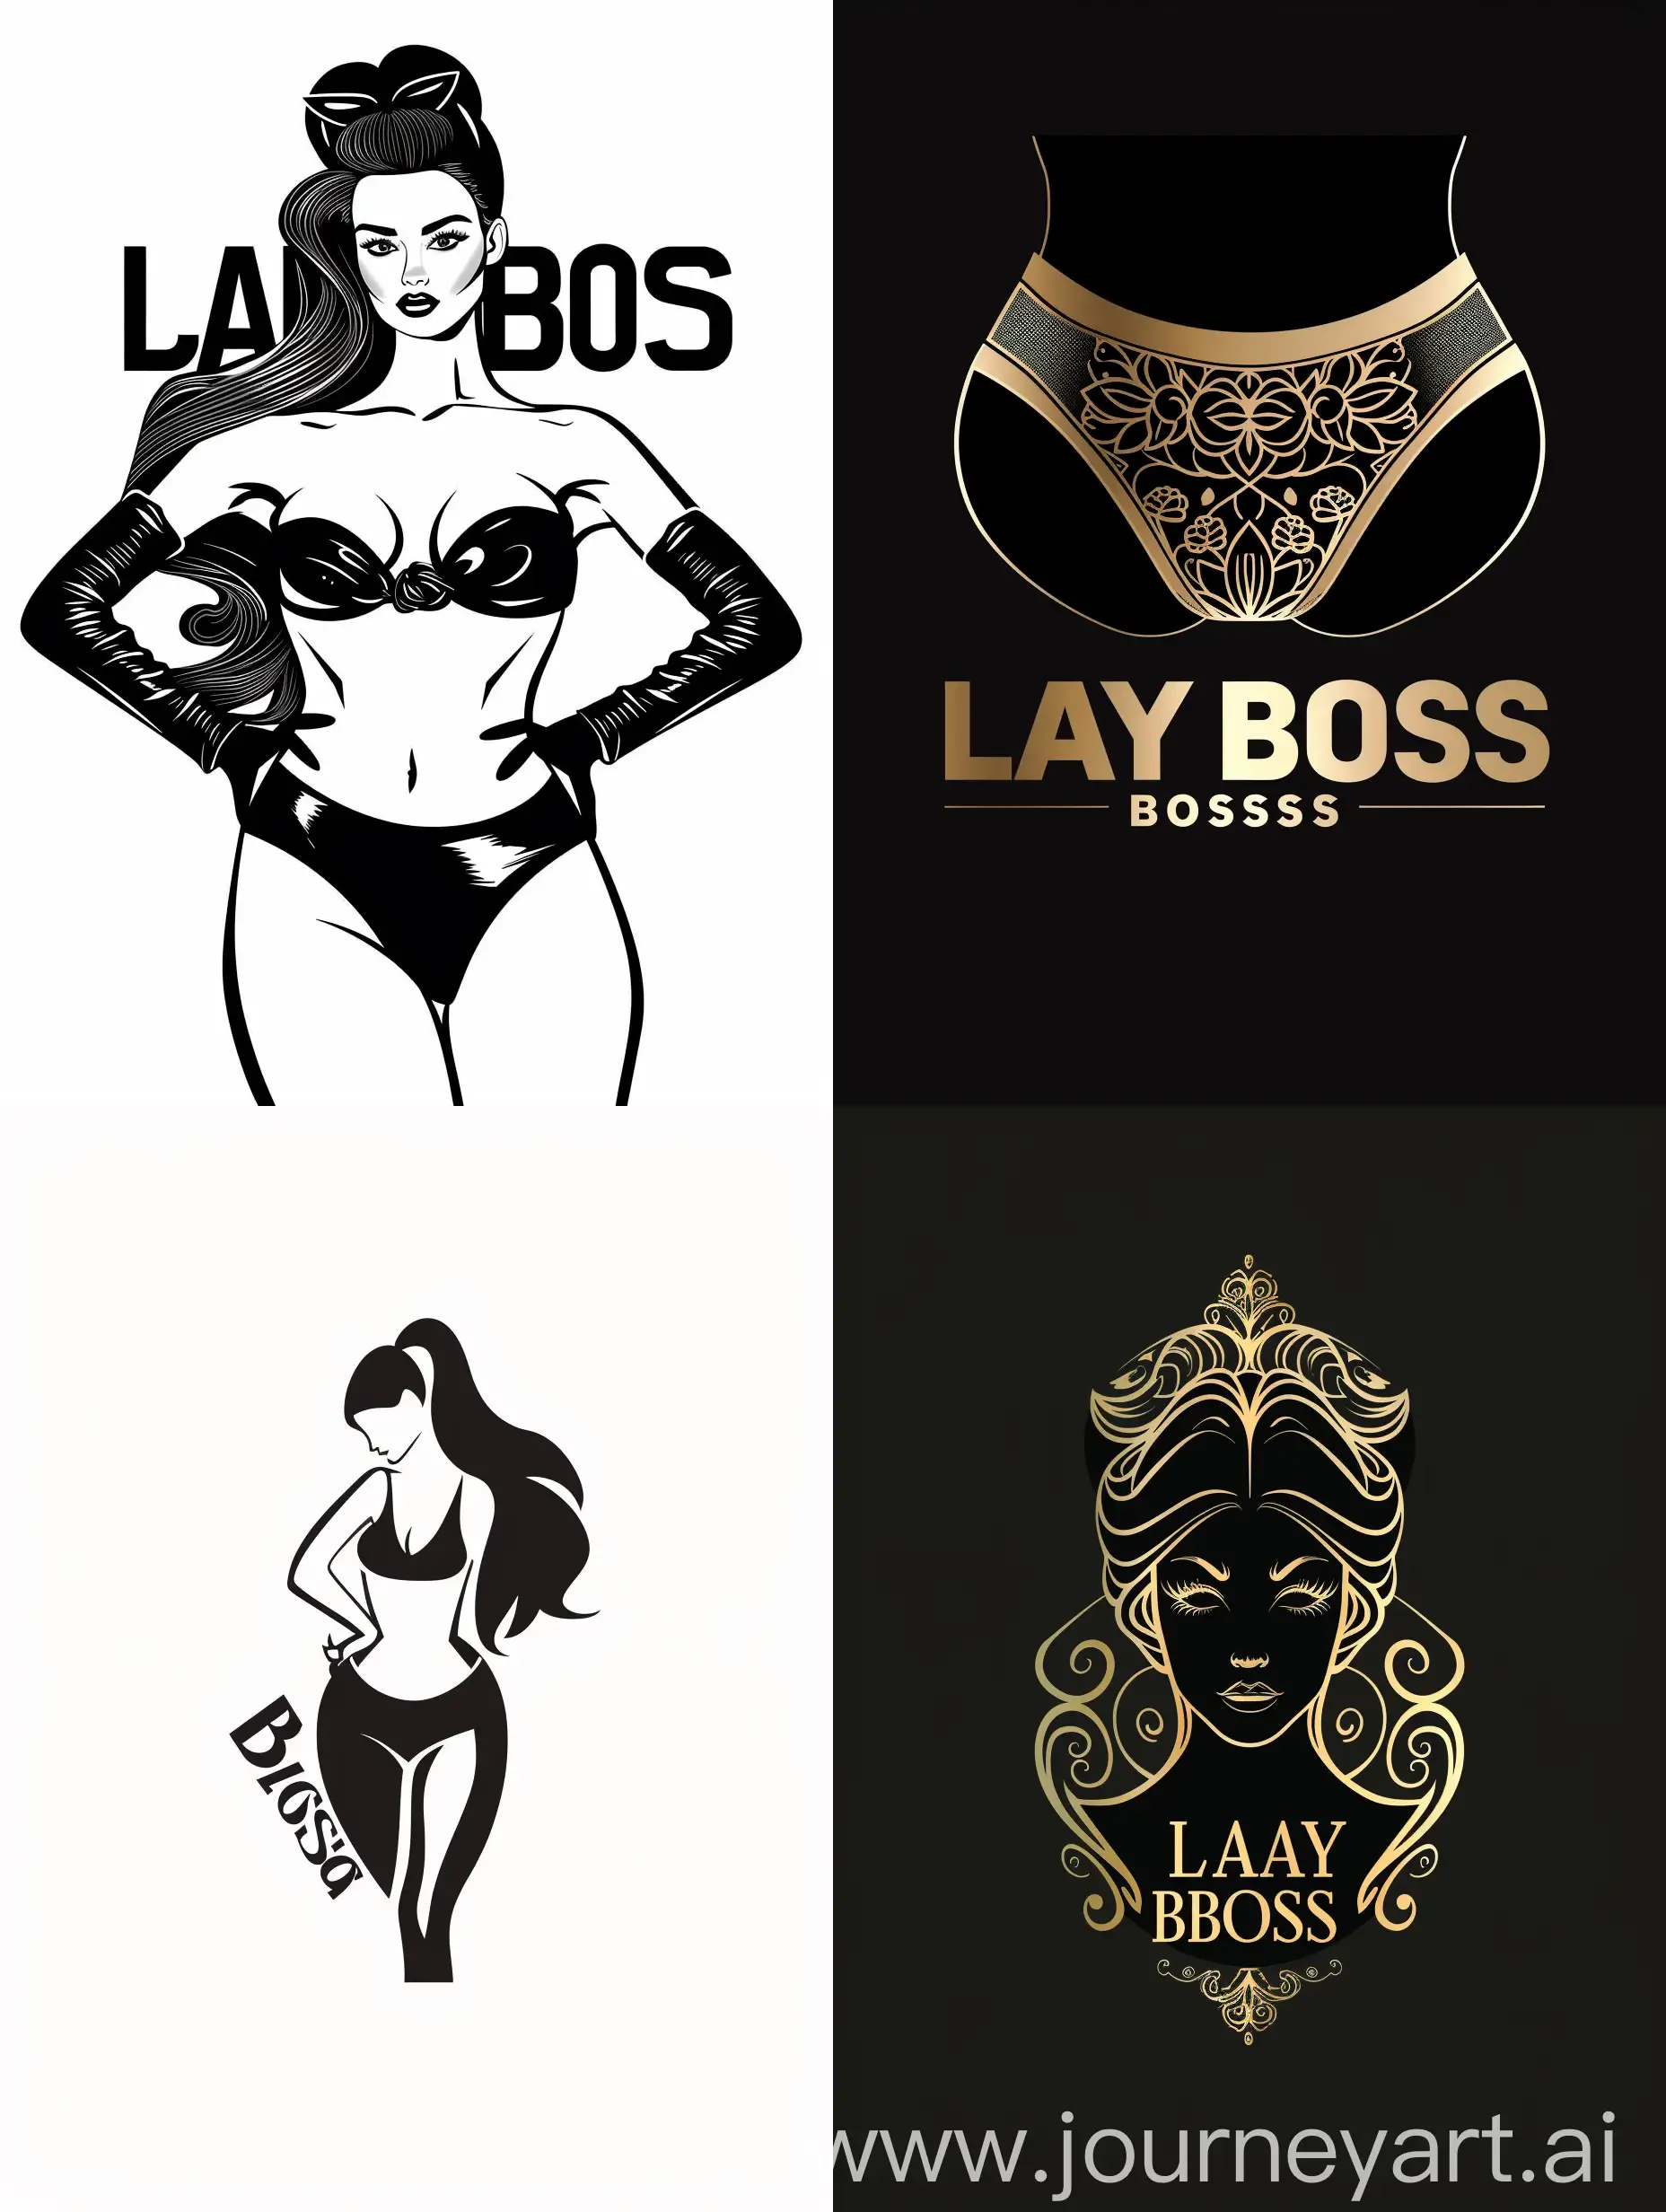 Make a logo from woman's underwear shop that name "LADY BOSS"